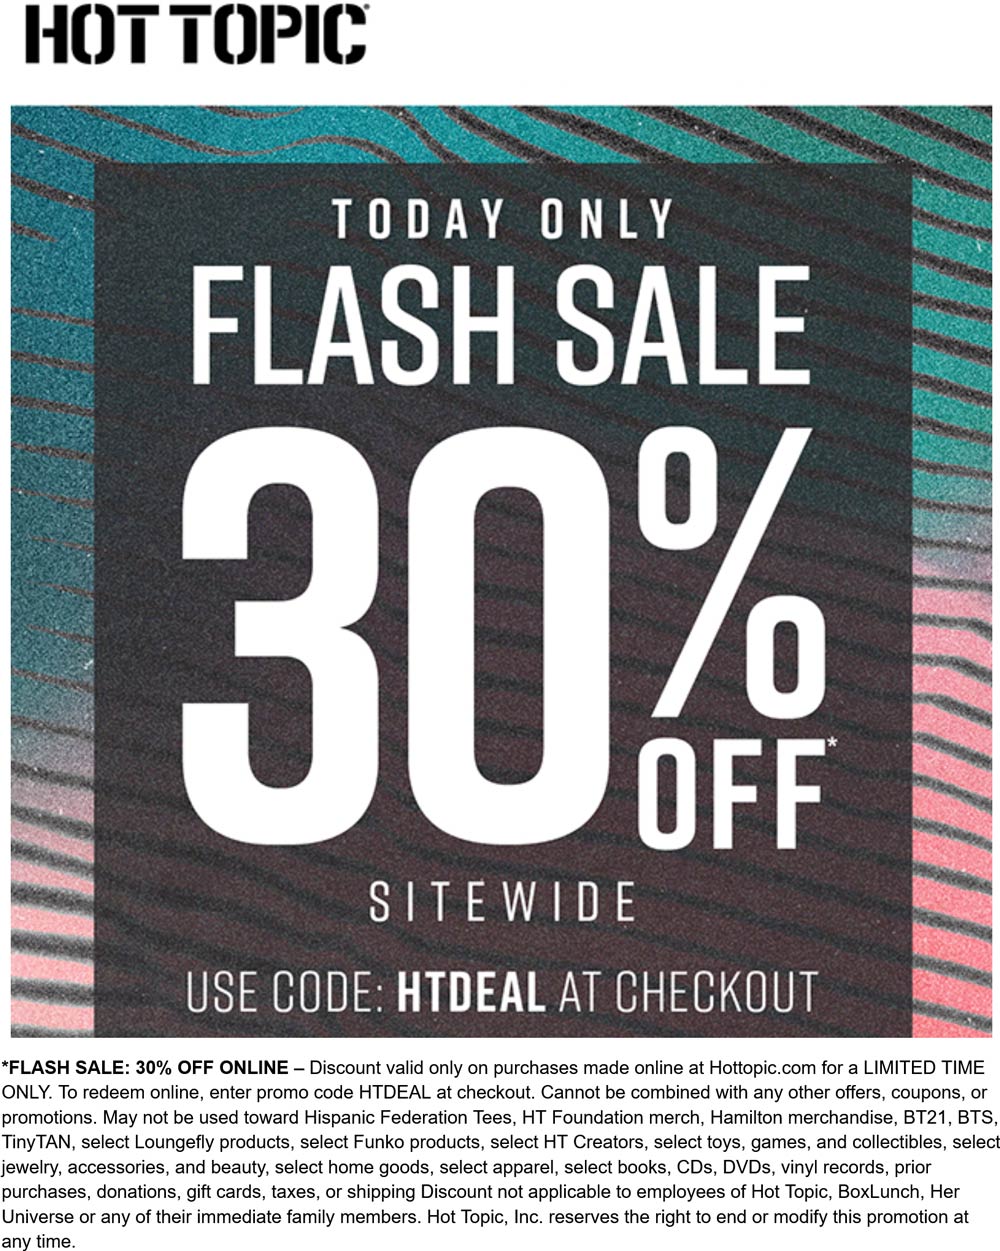 Hot Topic stores Coupon  30% off everything online today at Hot Topic via promo code HTDEAL #hottopic 